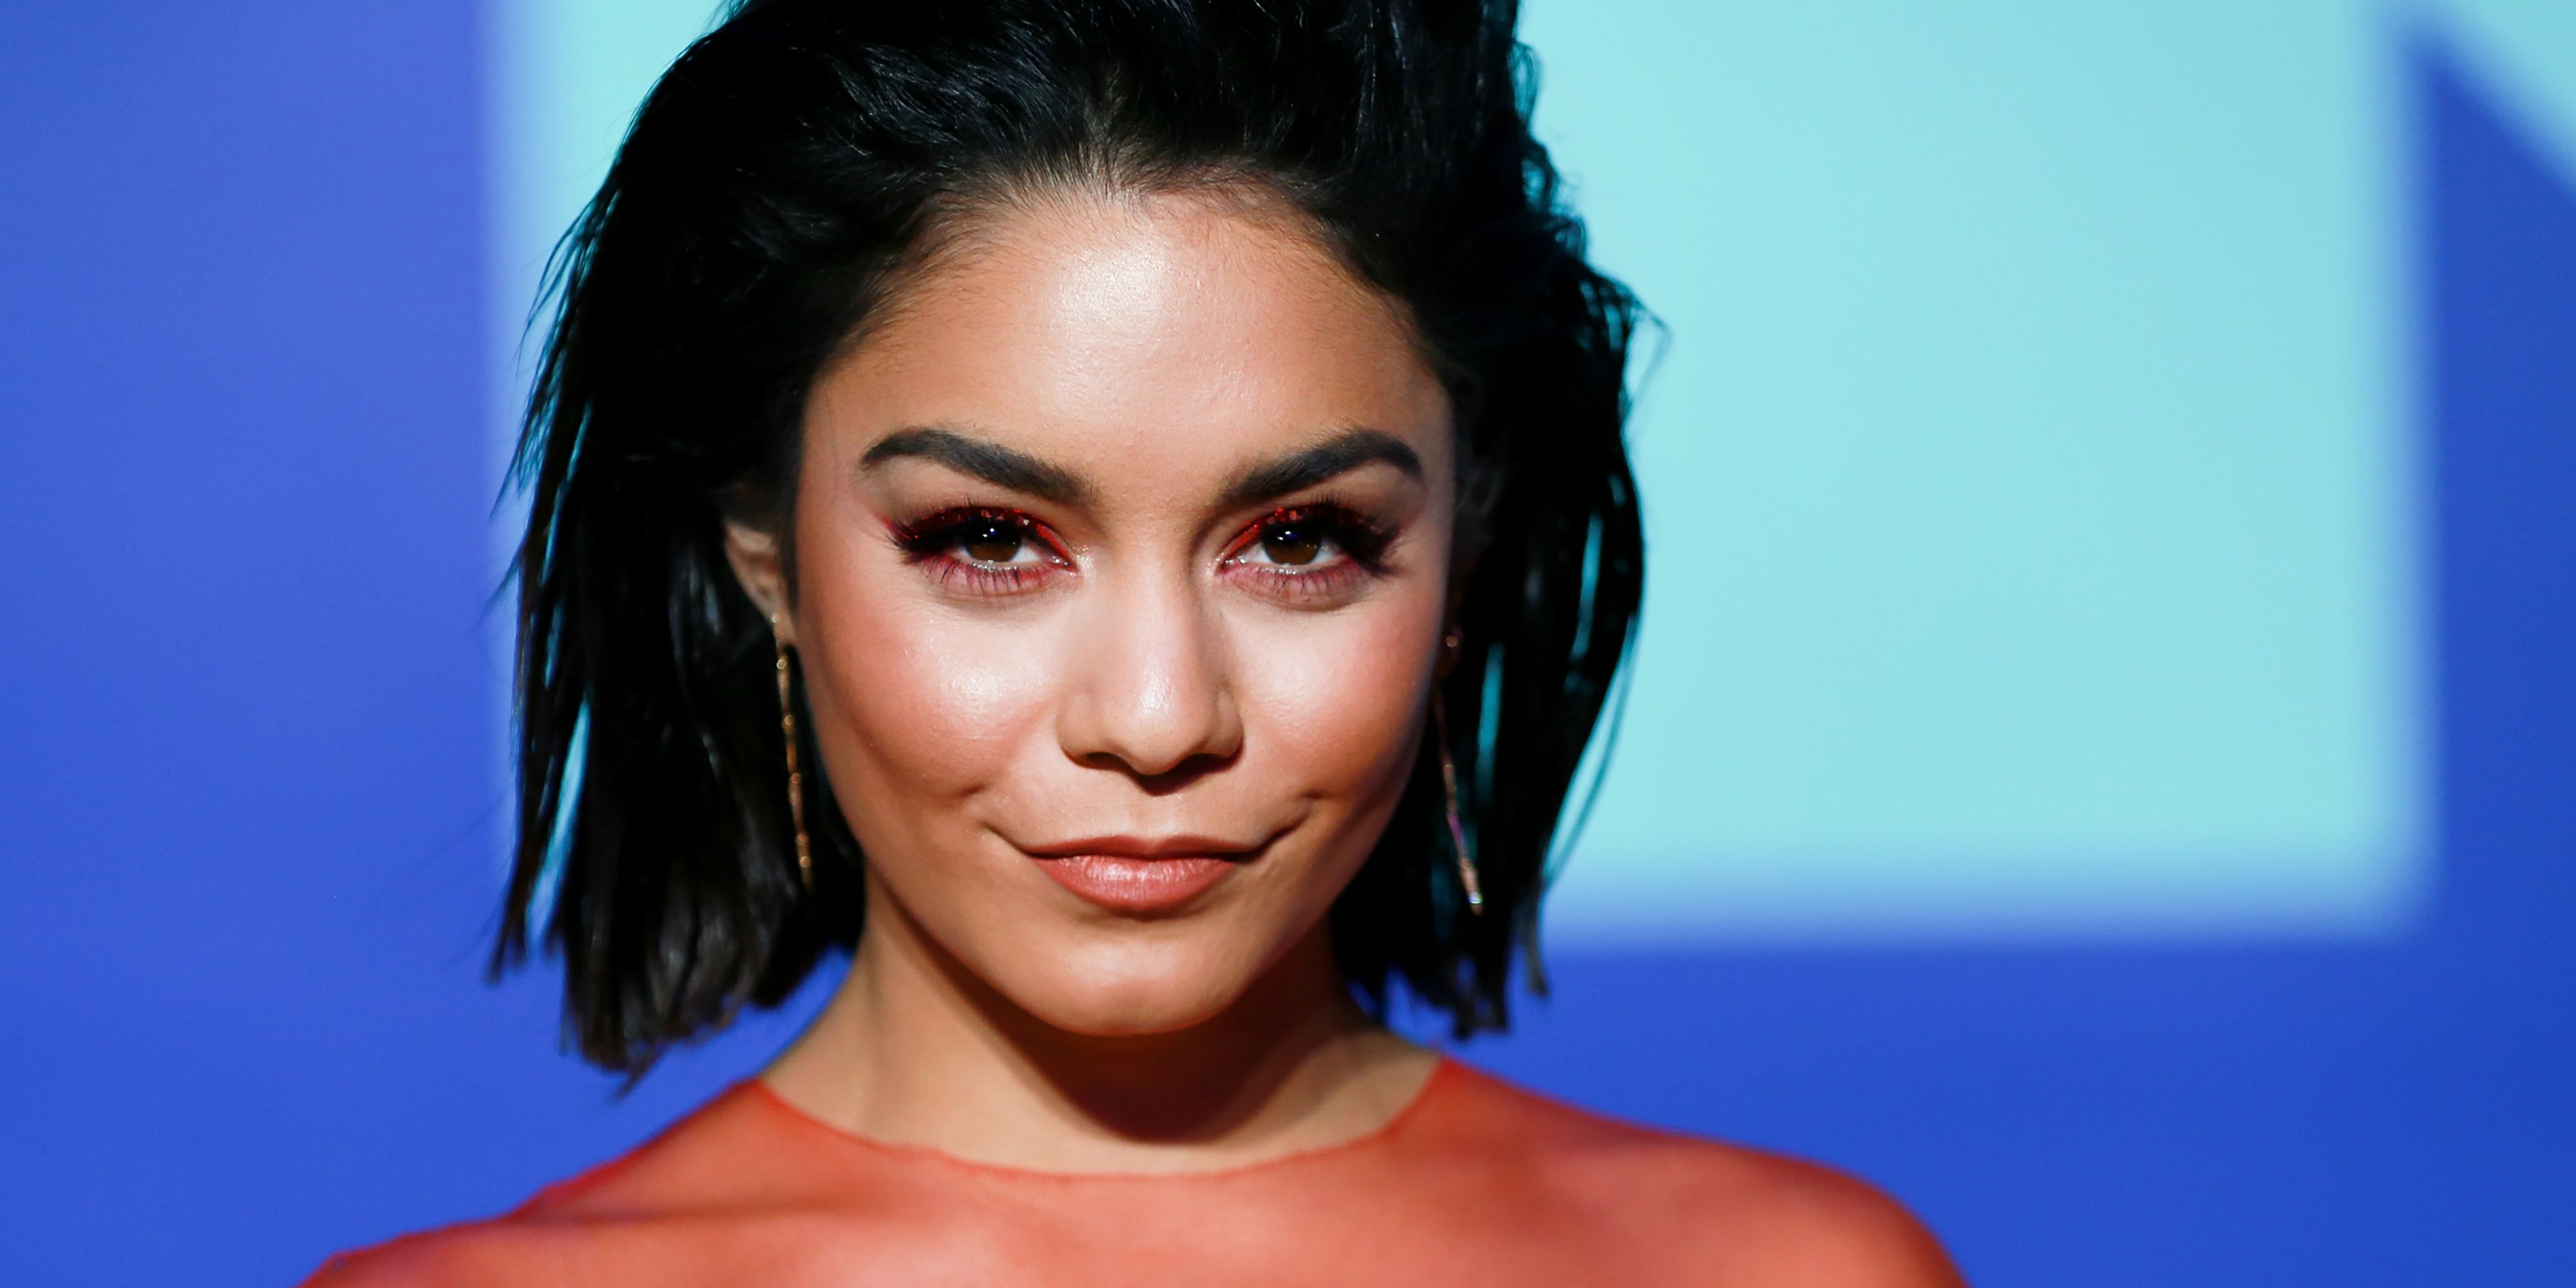 Vanessa Hudgens Makeup Collaboration With Sinful Colors Vanessa Hudgens Festival Themed Eye Shadow Palette And Nail Polishes